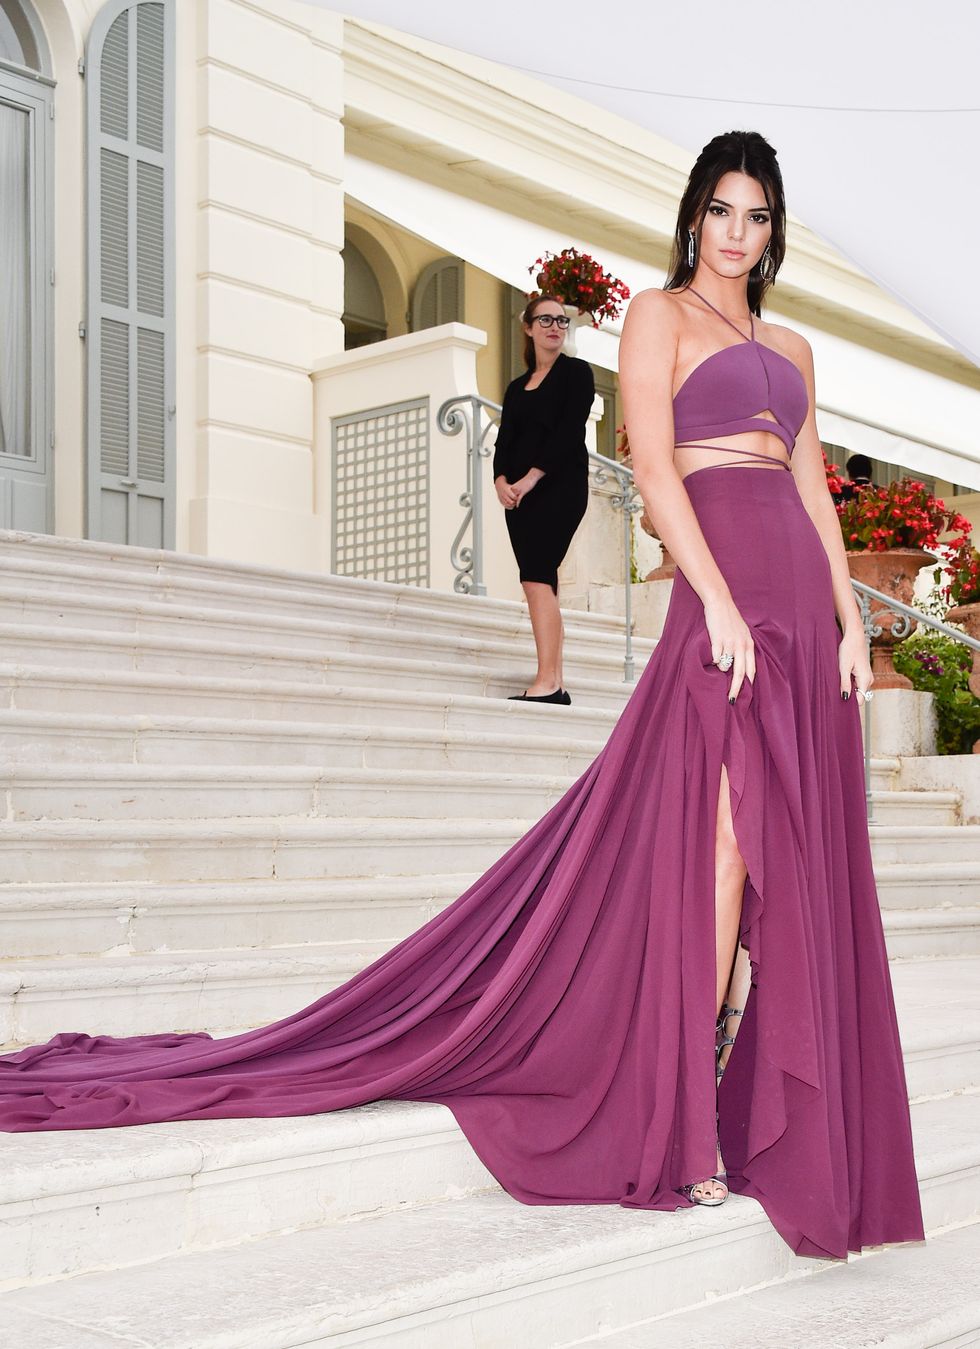 Kendall Jenner at the 2015 amfAR Against Aids gala